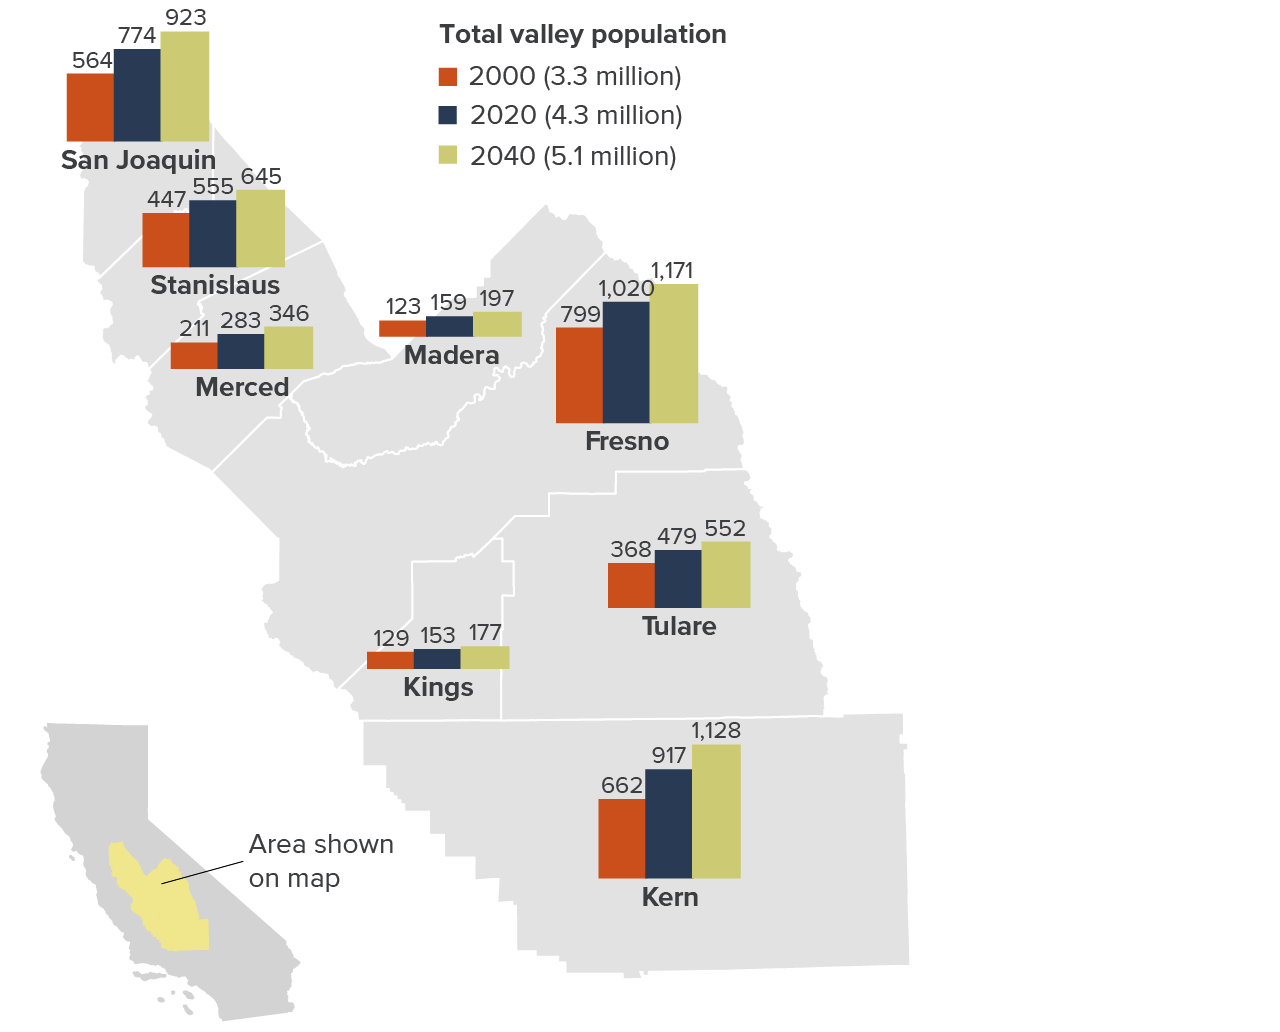 figure - The valley could continue to experience rapid population growth as SGMA is implemented